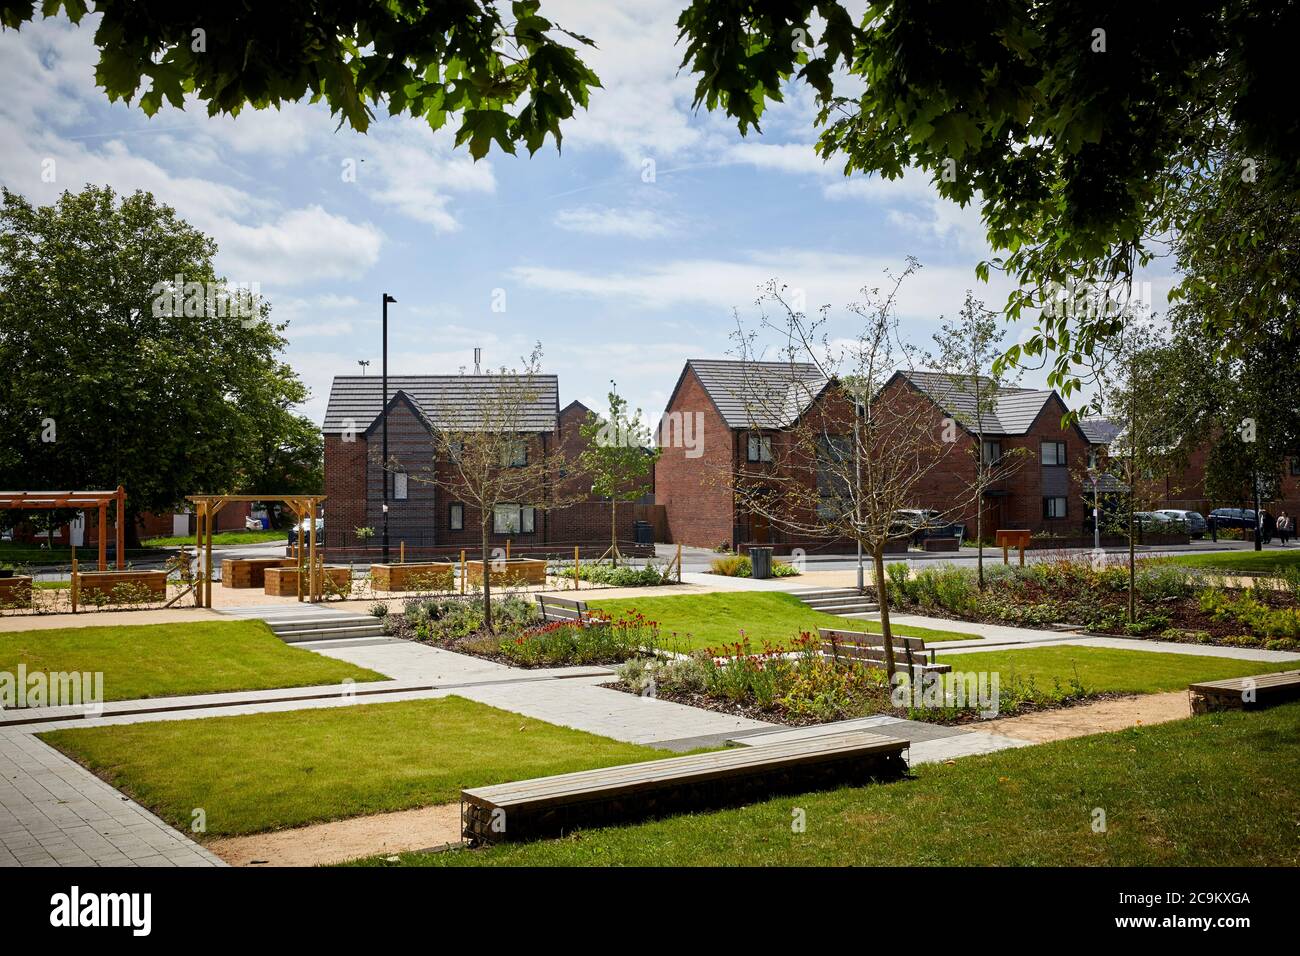 The former Shameless Estate in West Gorton has been transformed into Sponge Park  consisting of community space, walkways and playing areas. Stock Photo